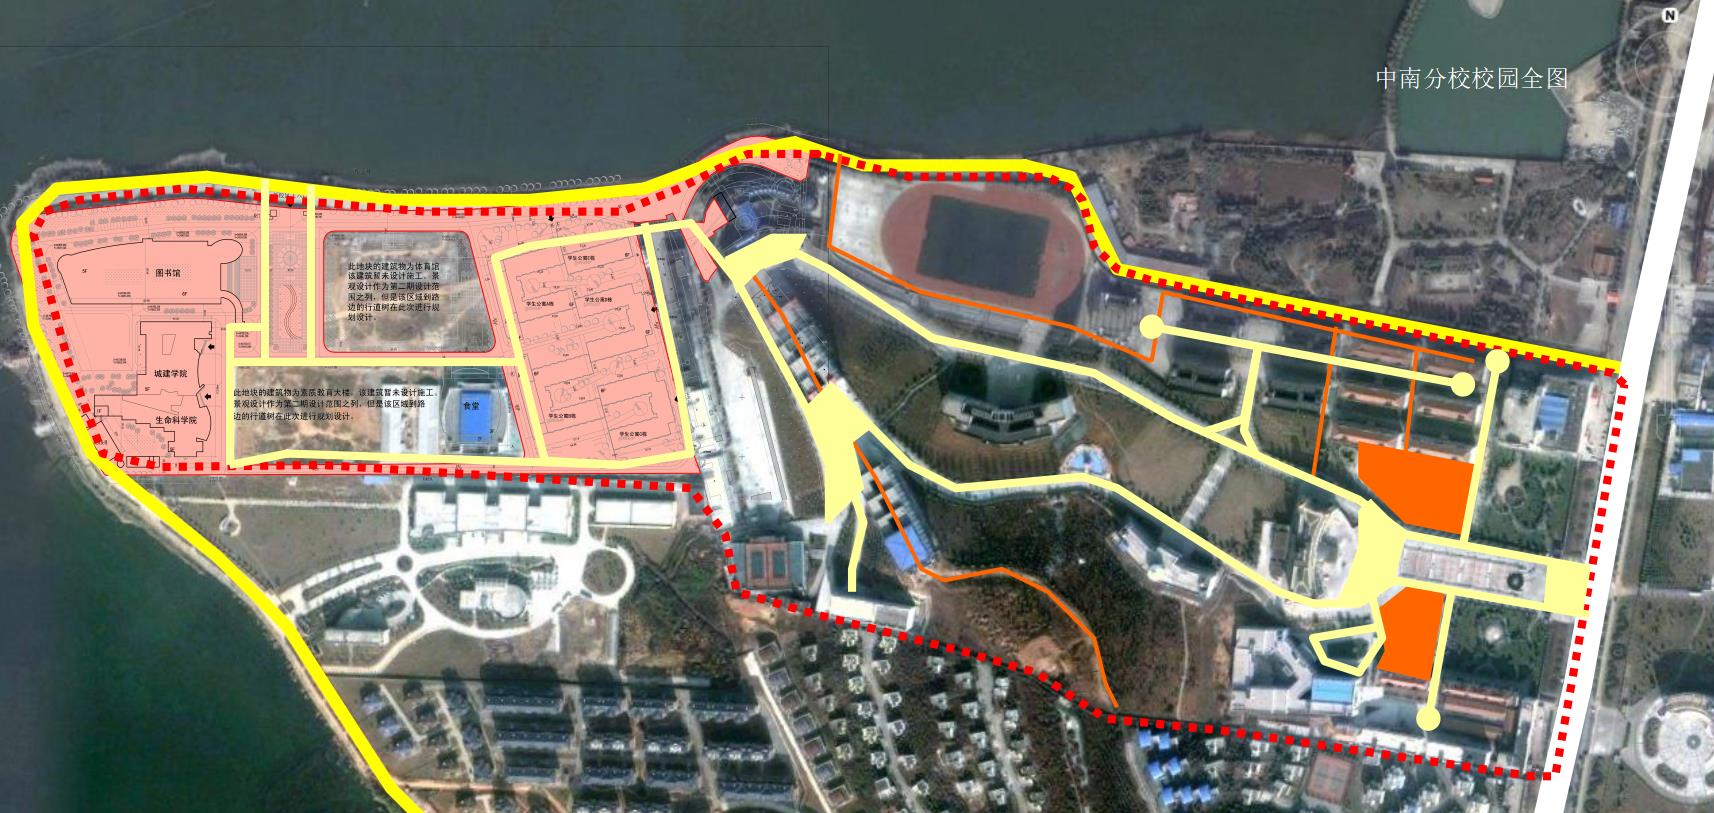 Landscape planning and design of the West Campus of Central South Branch of Wuhan University of science and technology(图1)